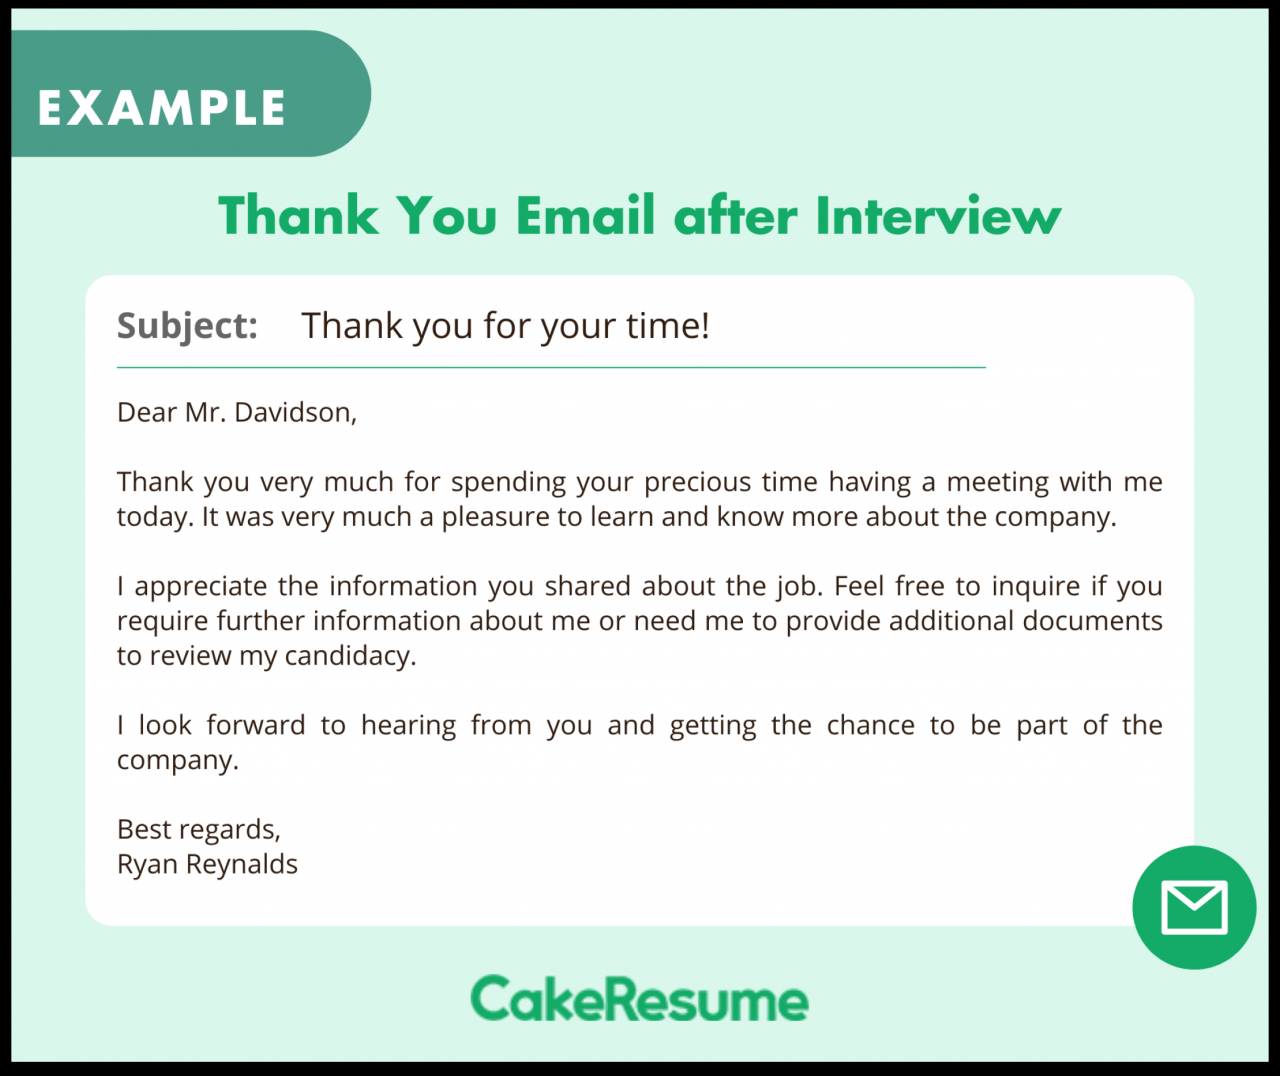 Sending an email for a job interview